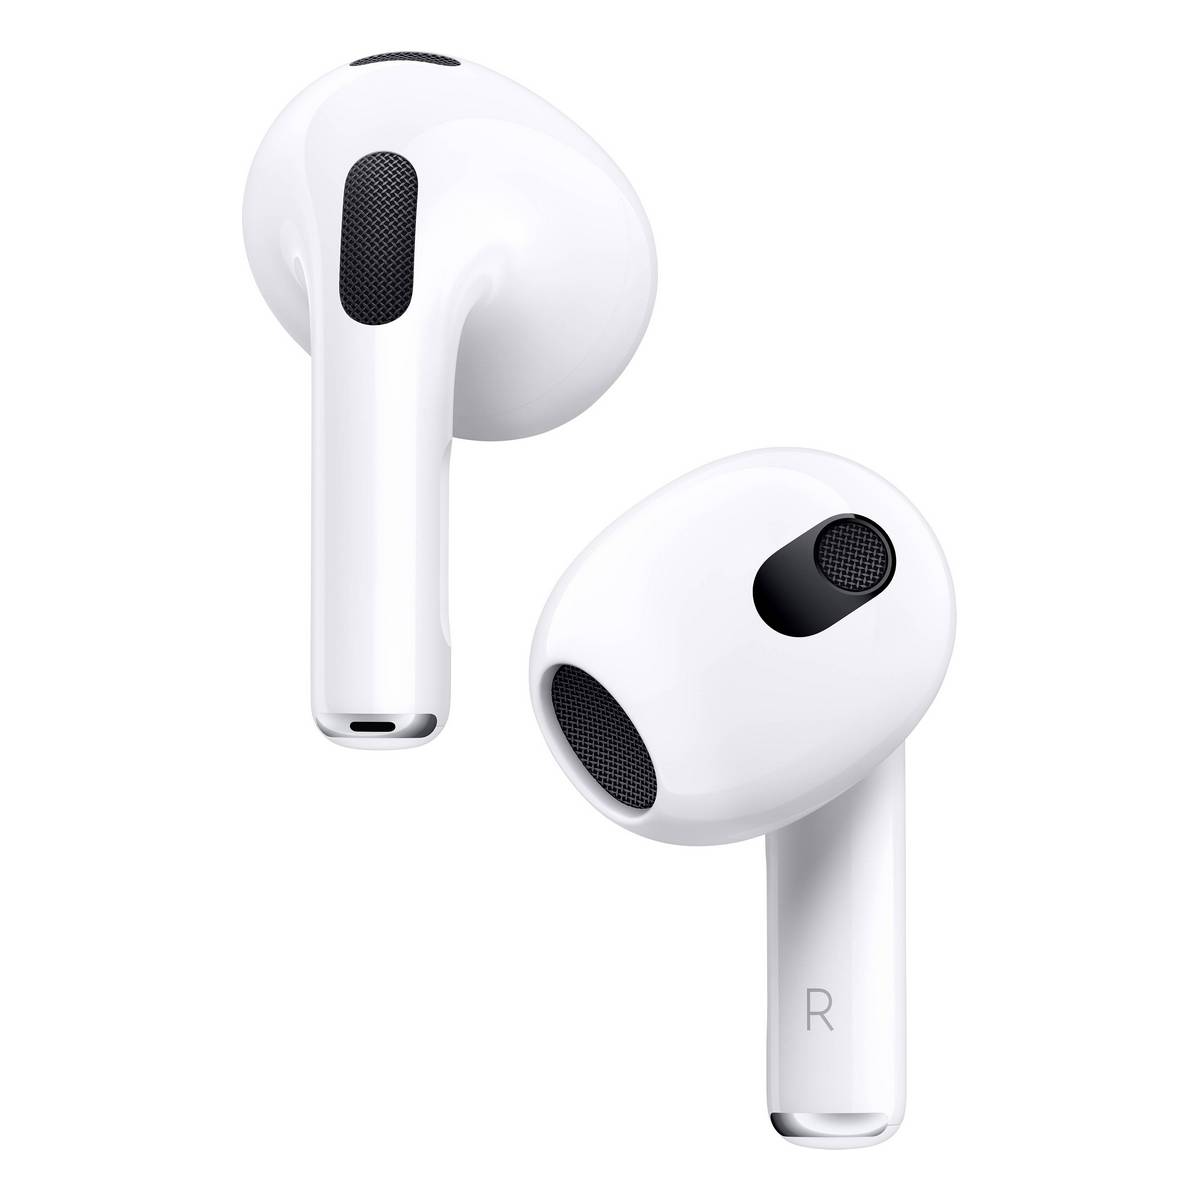 APPLE AIRPODS (3RD GENERATION) MME73ZM/A